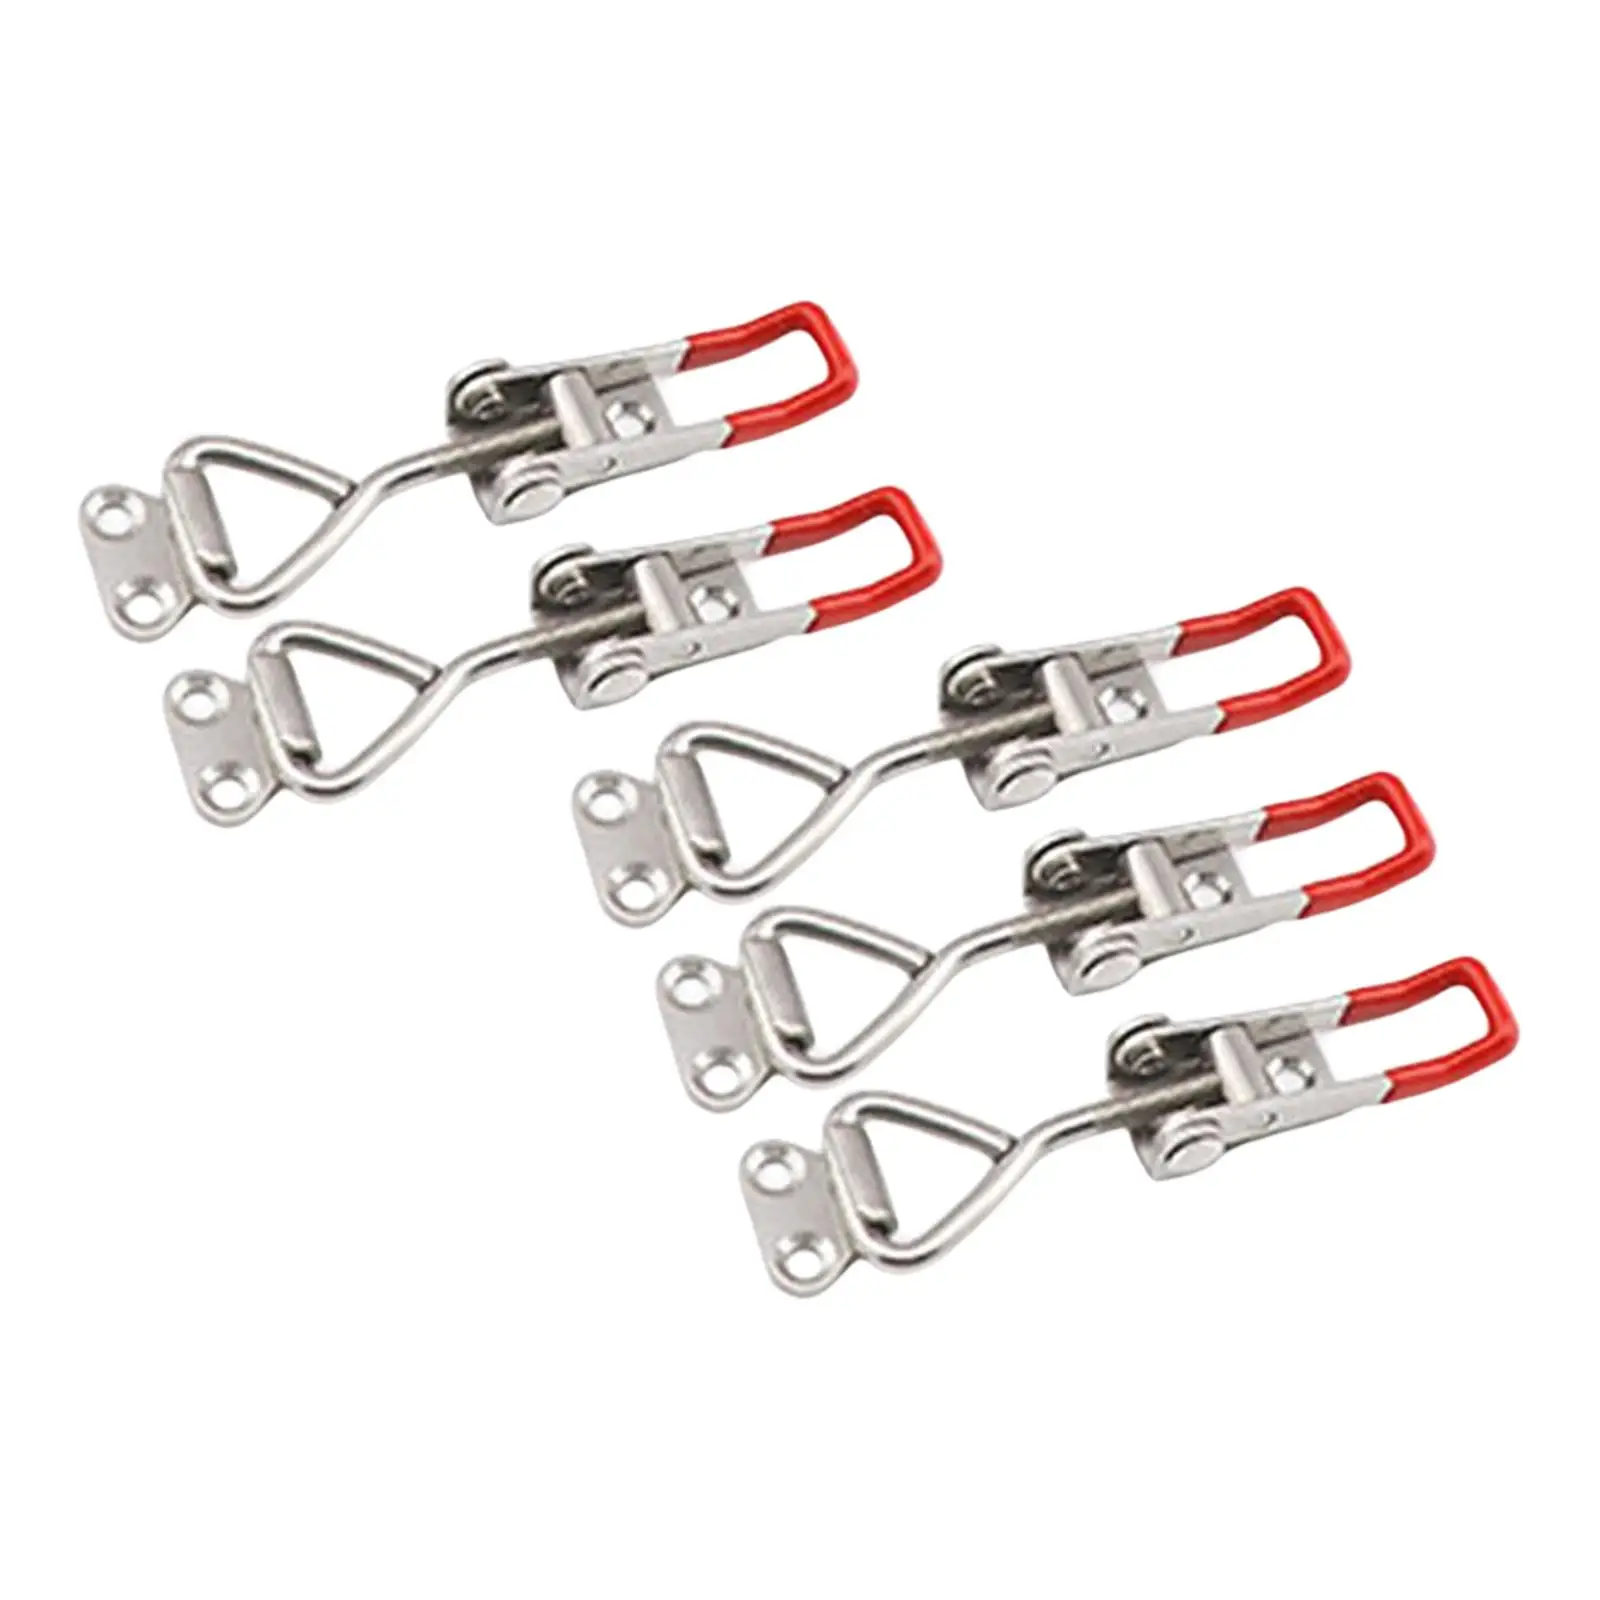 5x Push Pull Action Toggle Latch Clamp Stainless Steel Adjustable Horizontal Quick Release for Tool Box Case Home Sliding Door